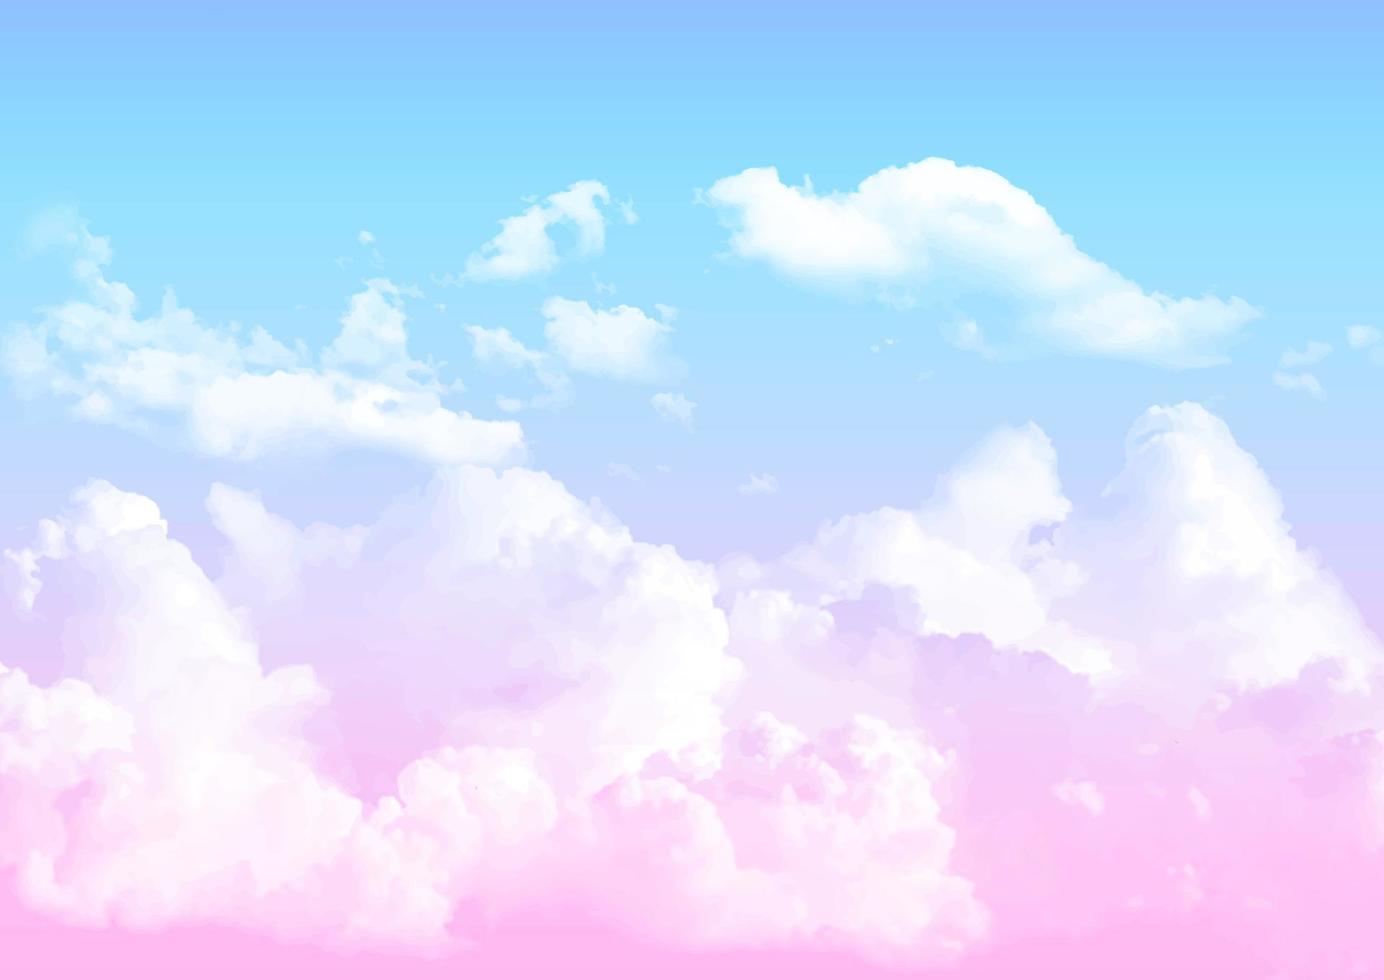 Abstract sky background with sugar cotton clouds vector